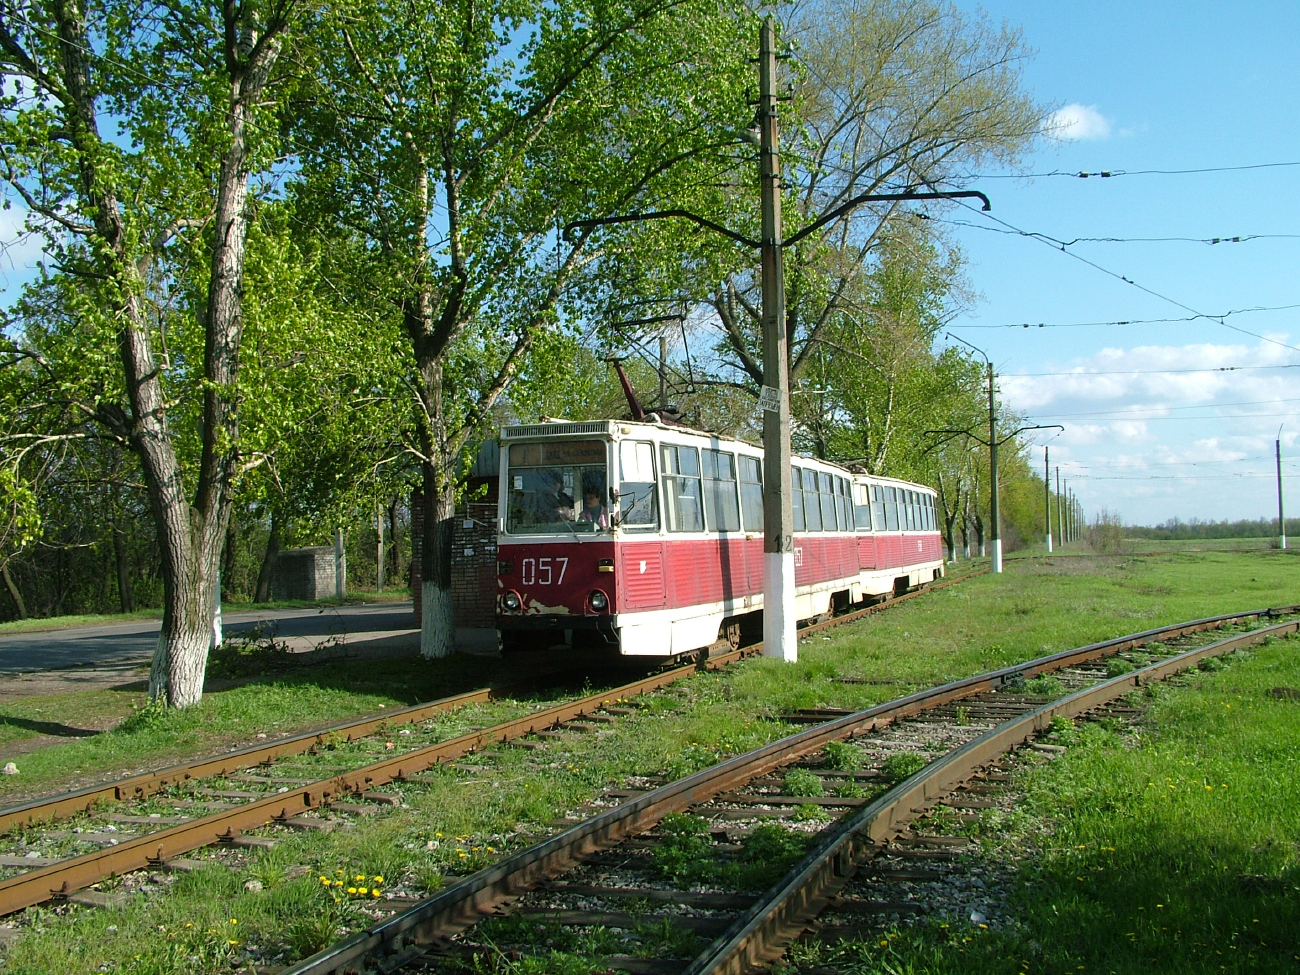 Avdeyevka, 71-605 (KTM-5M3) № 057; Avdeyevka, 71-605 (KTM-5M3) № 058; Avdeyevka — Lines and Infrastructure